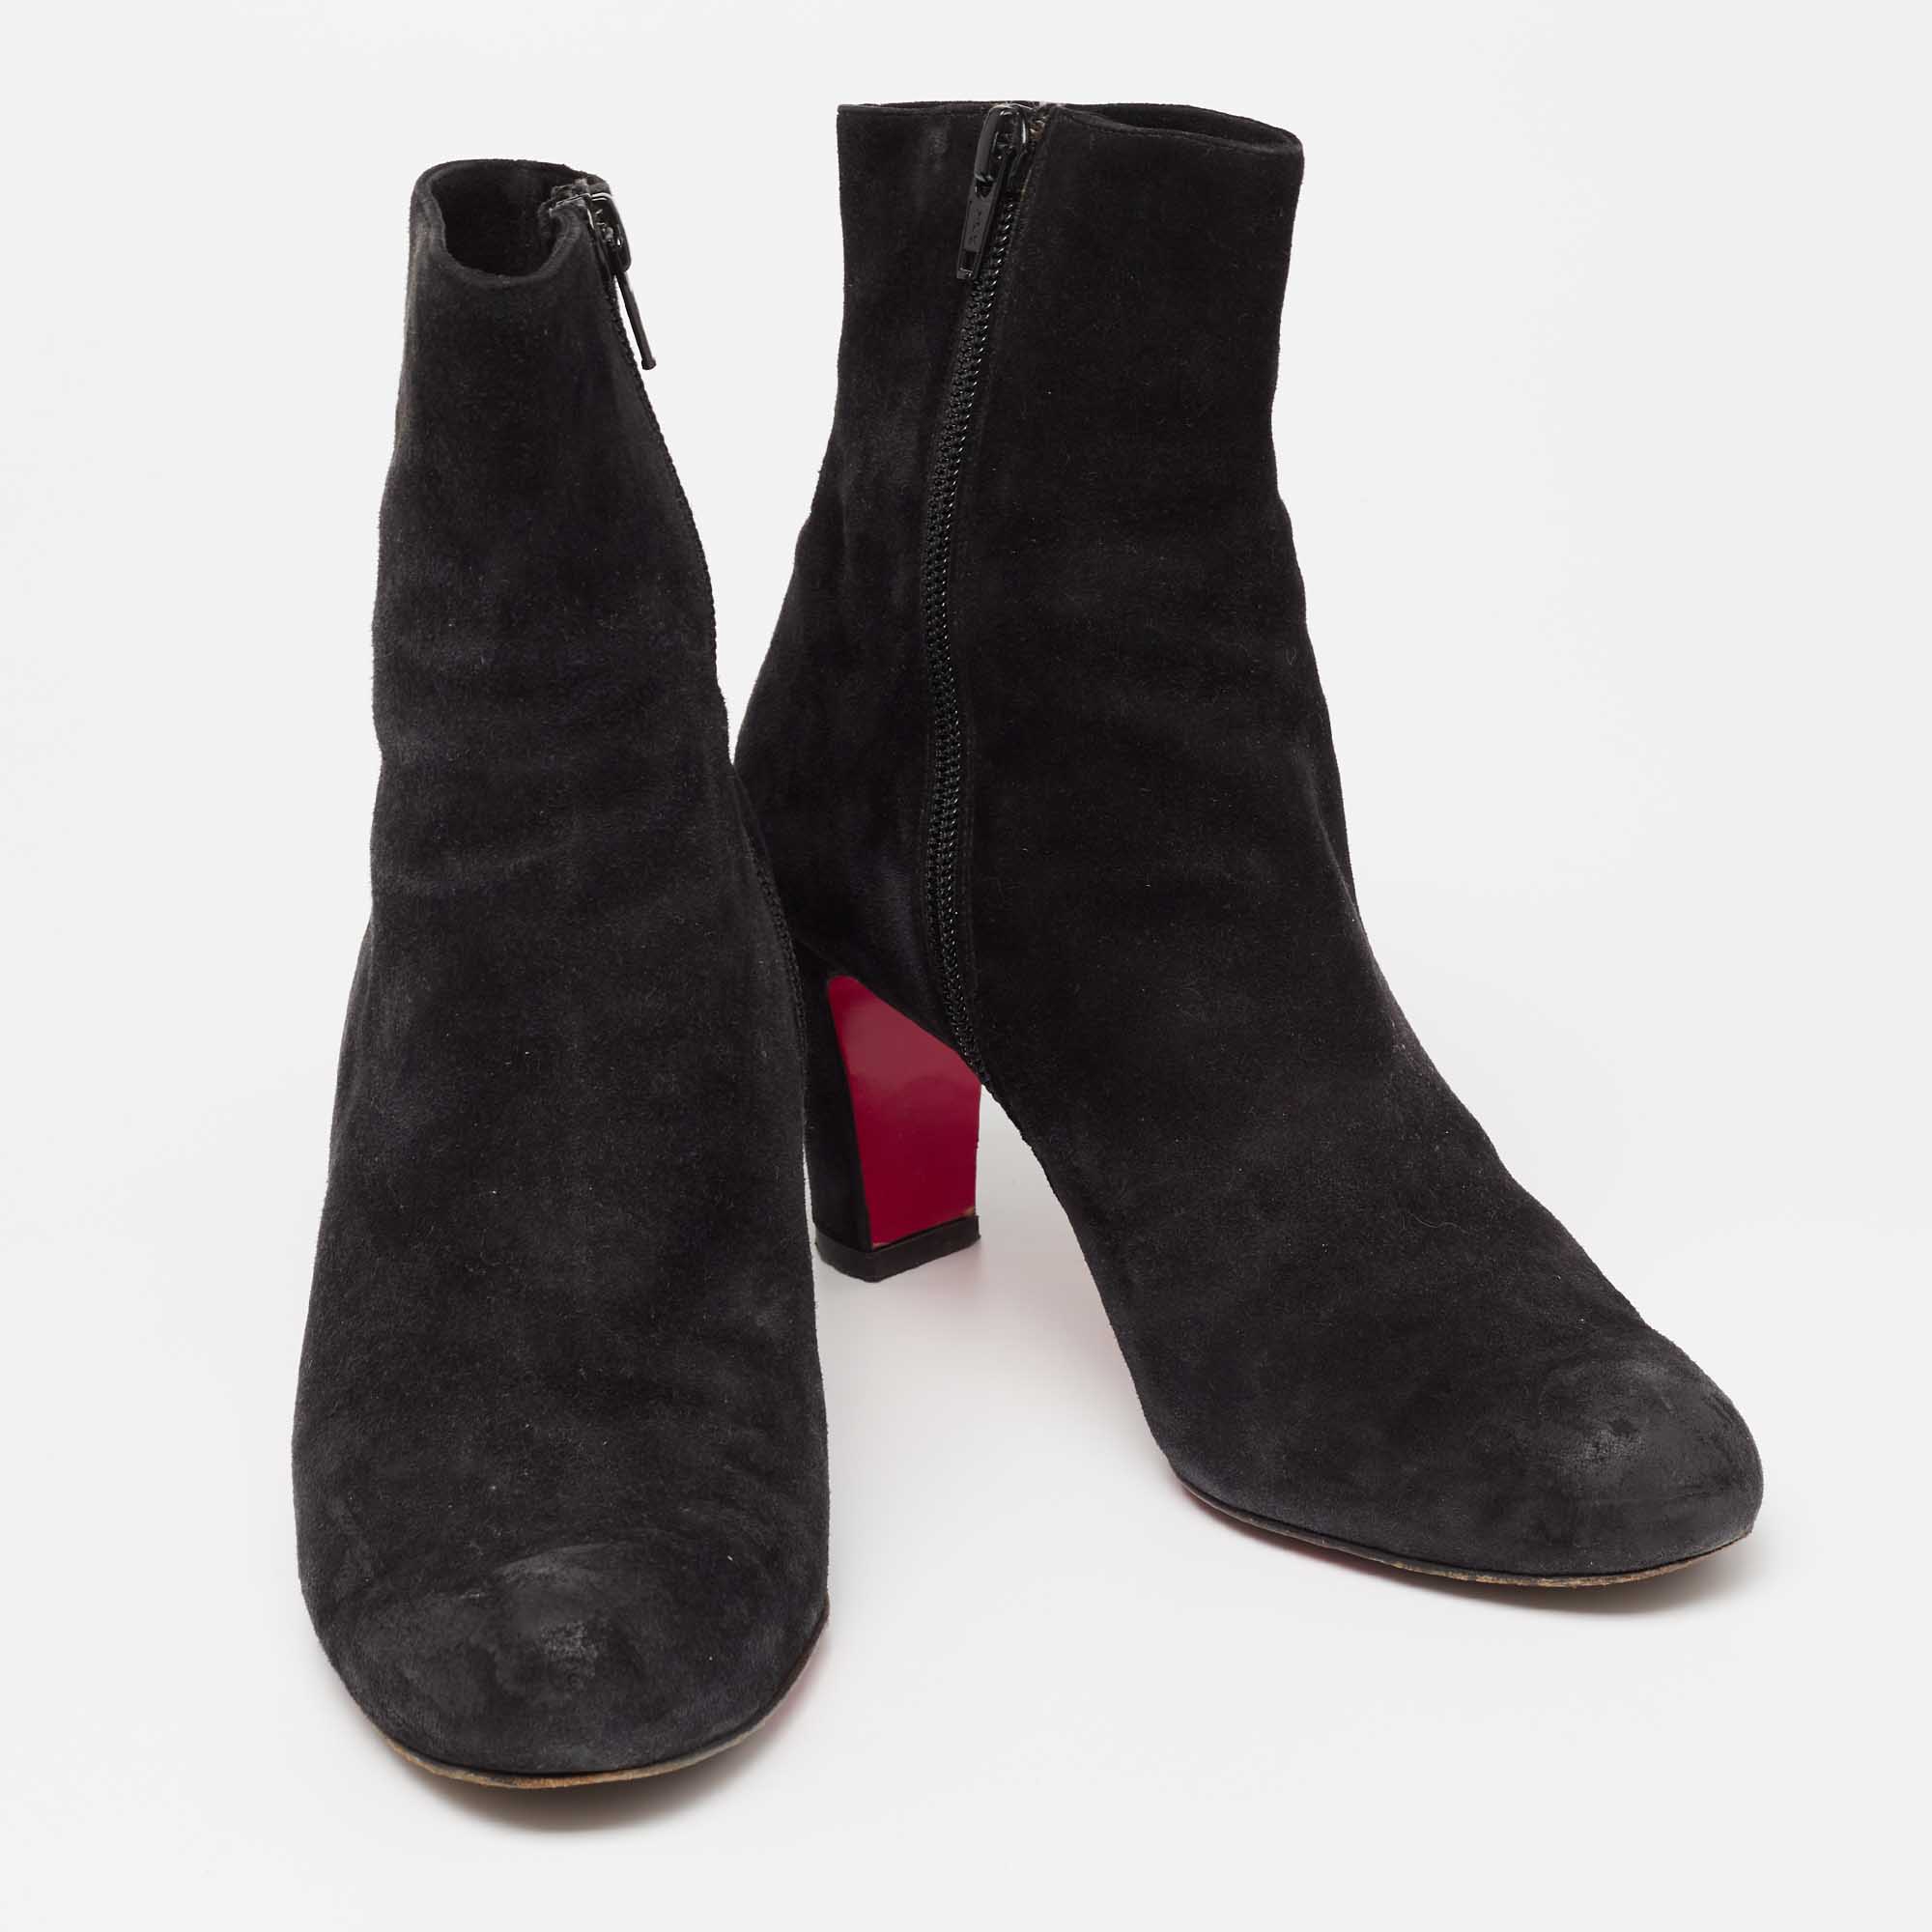 Christian Louboutin Black Suede Ankle Boots Size 36.5